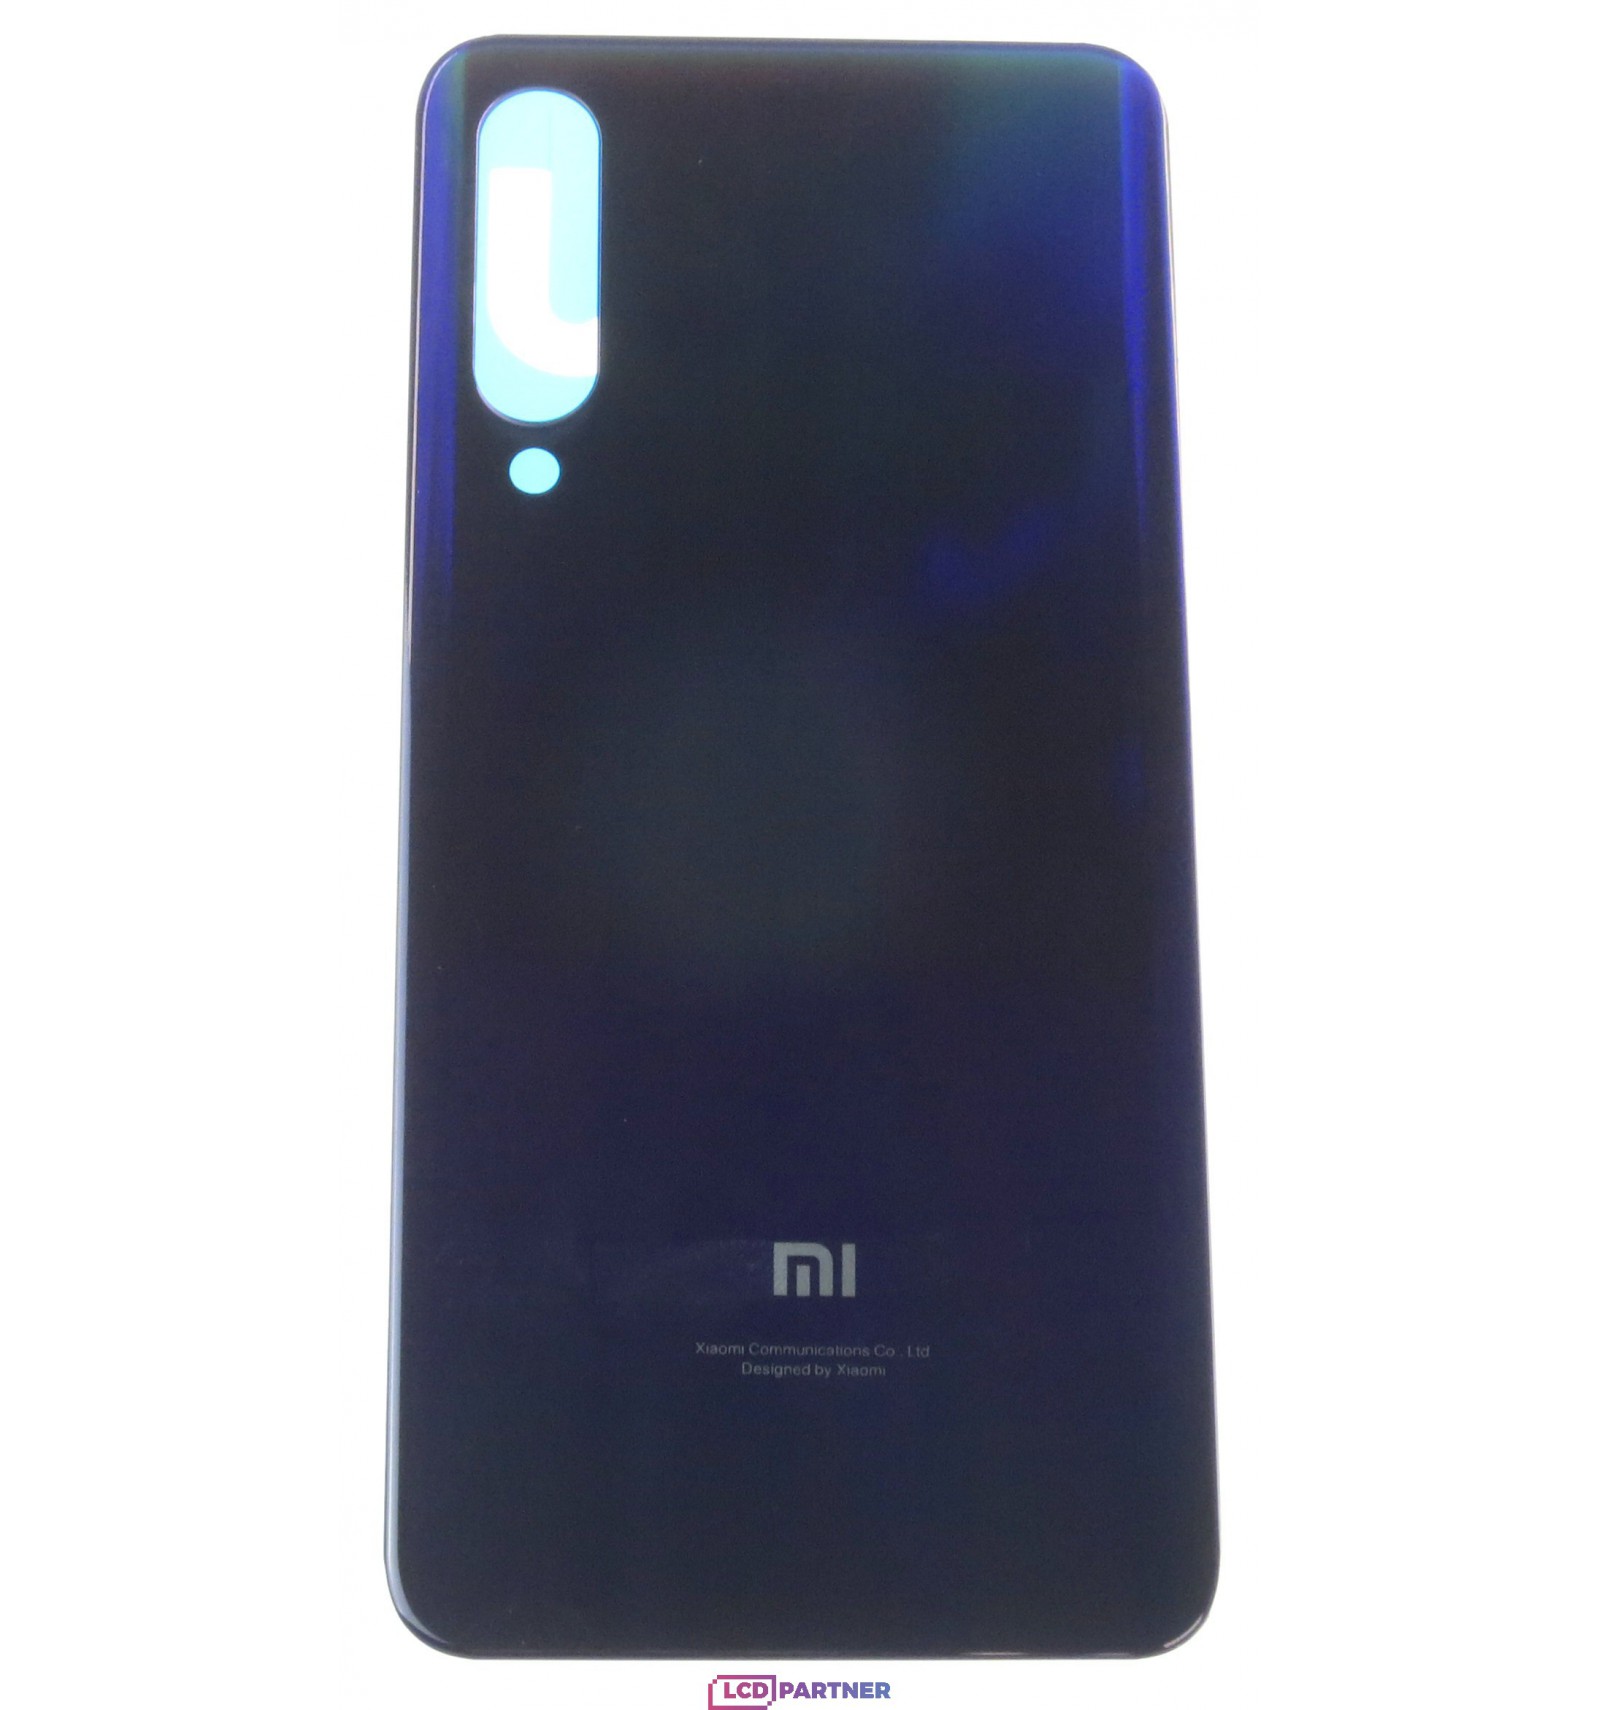 Self-respect exaggeration Anzai Battery cover violet replacement for Xiaomi Mi 9 SE | lcdpartner.com